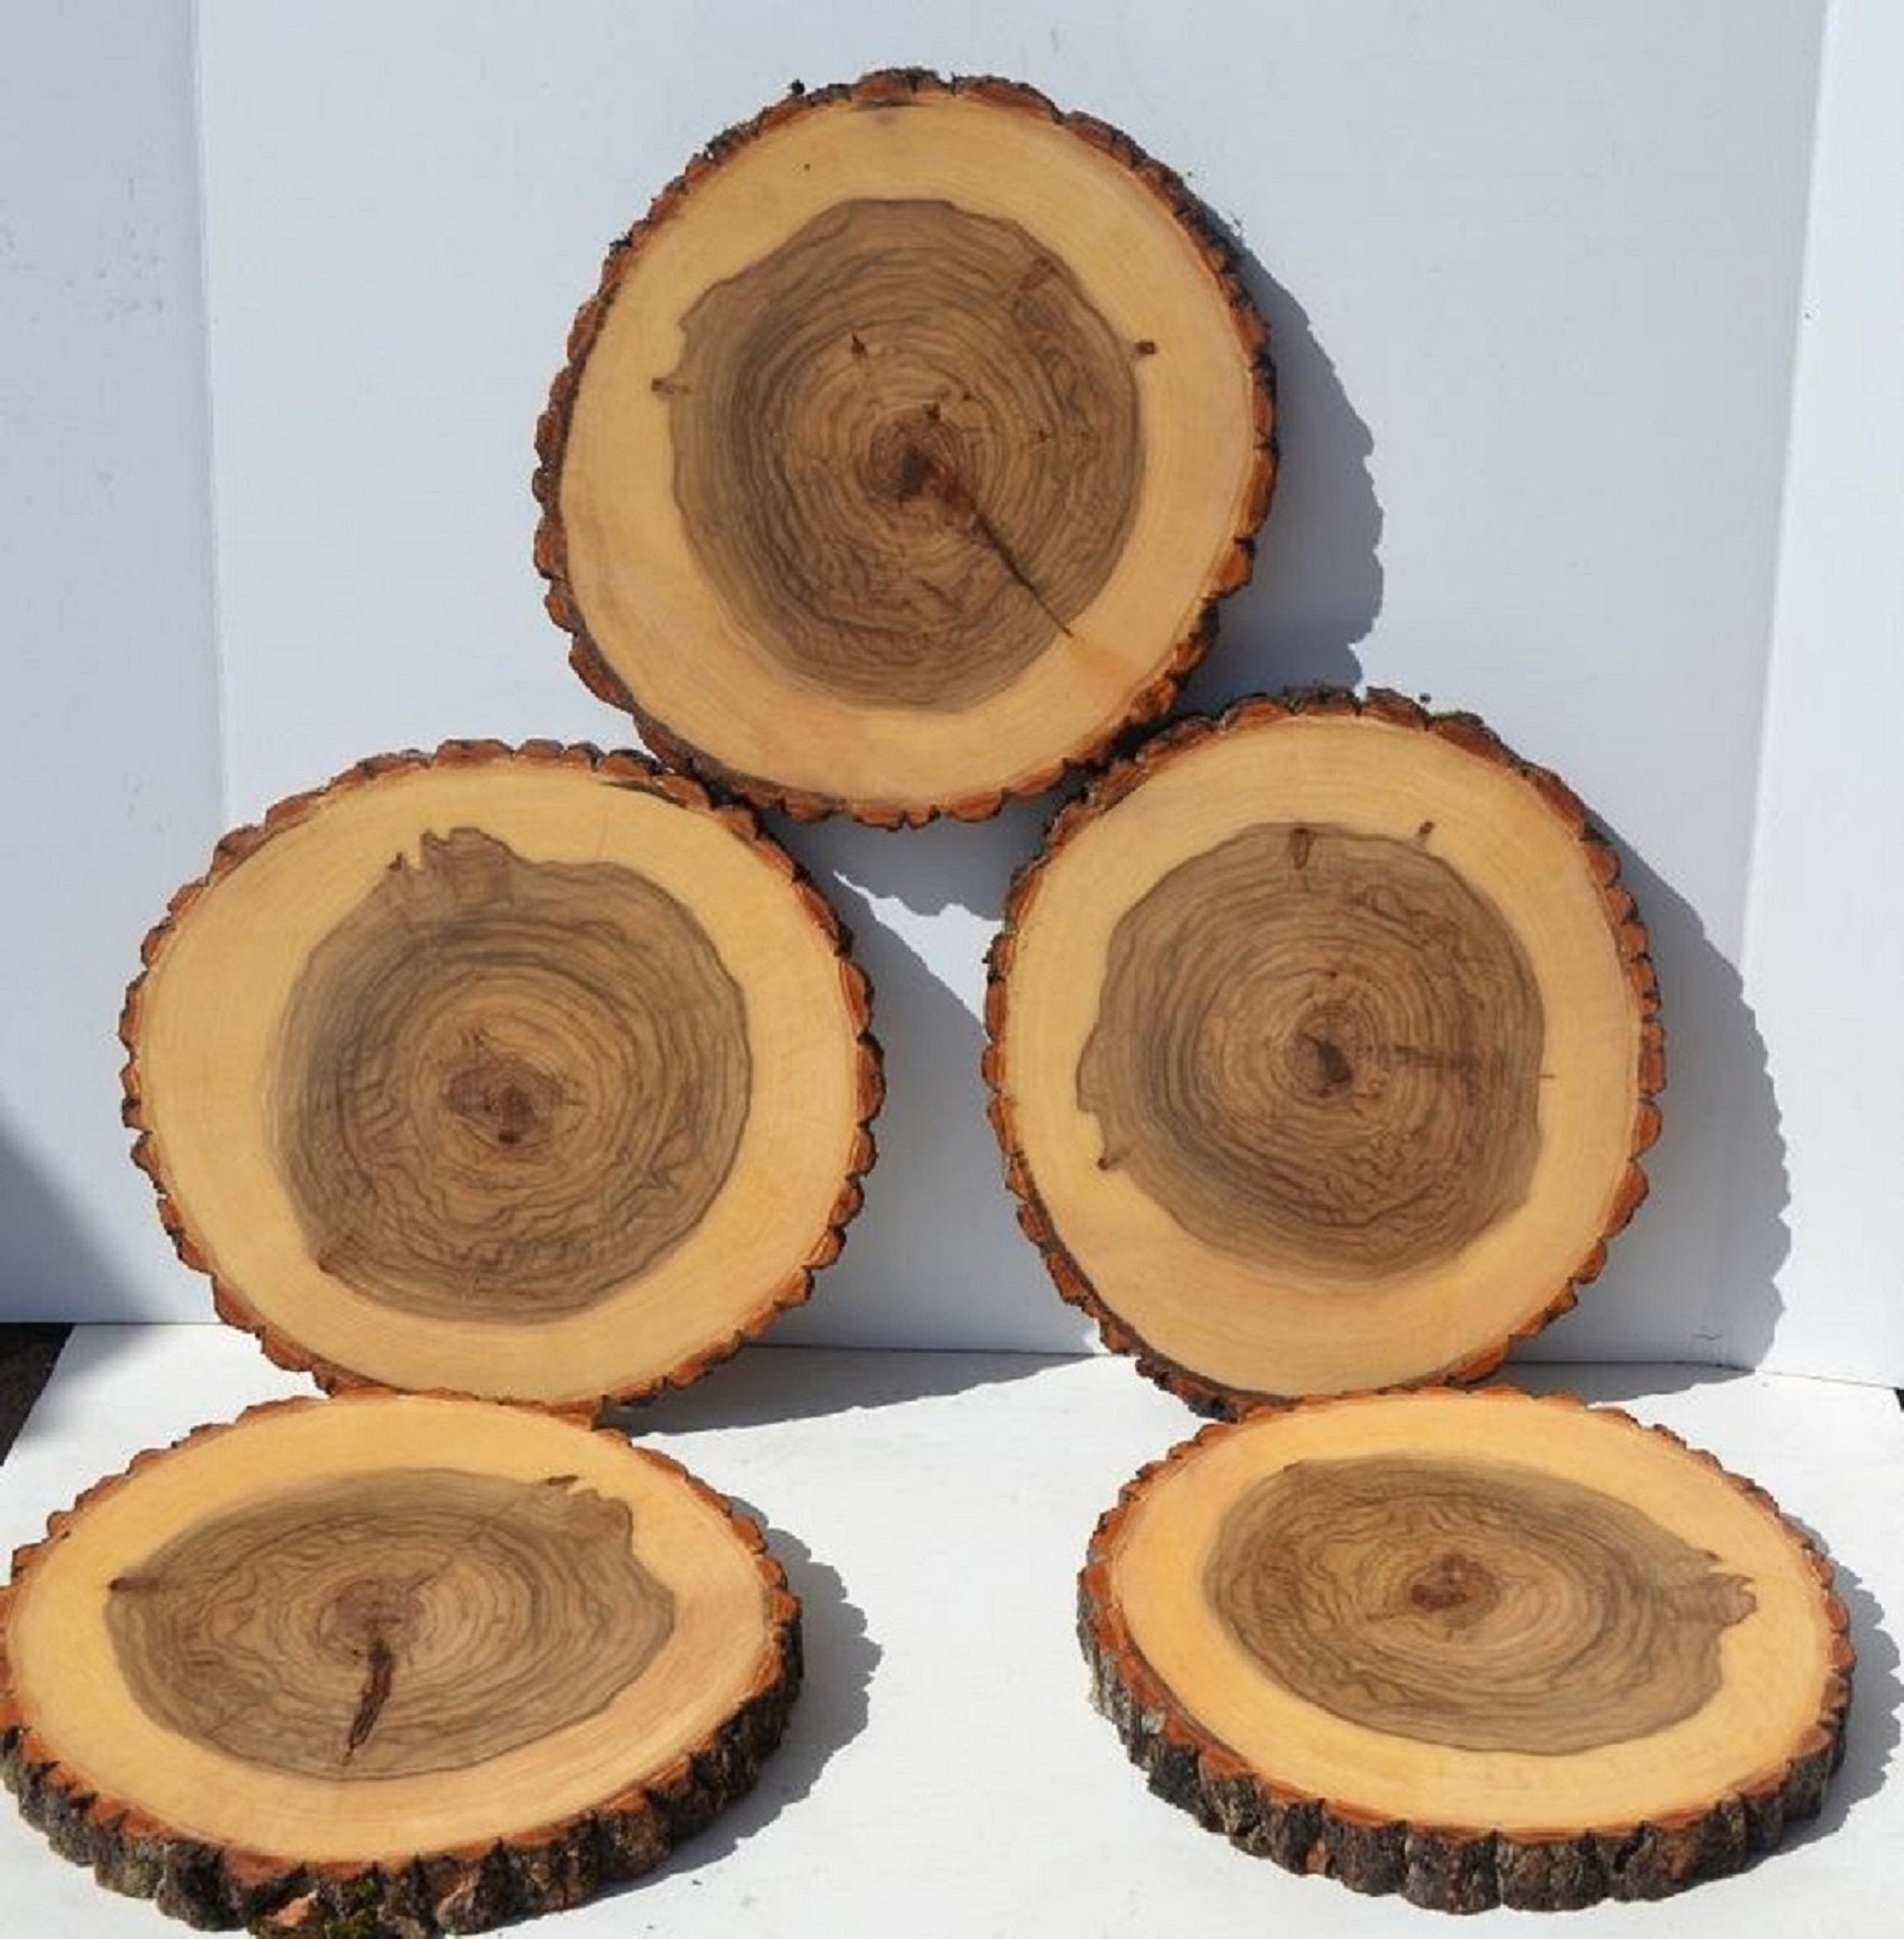 Set of 11-12 Inch Wood Slices for Rustic Wedding Centerpieces Natural Wood  Slices, Log Slices, Tree Slices, Wood Cuts, Wood Stump Slices 